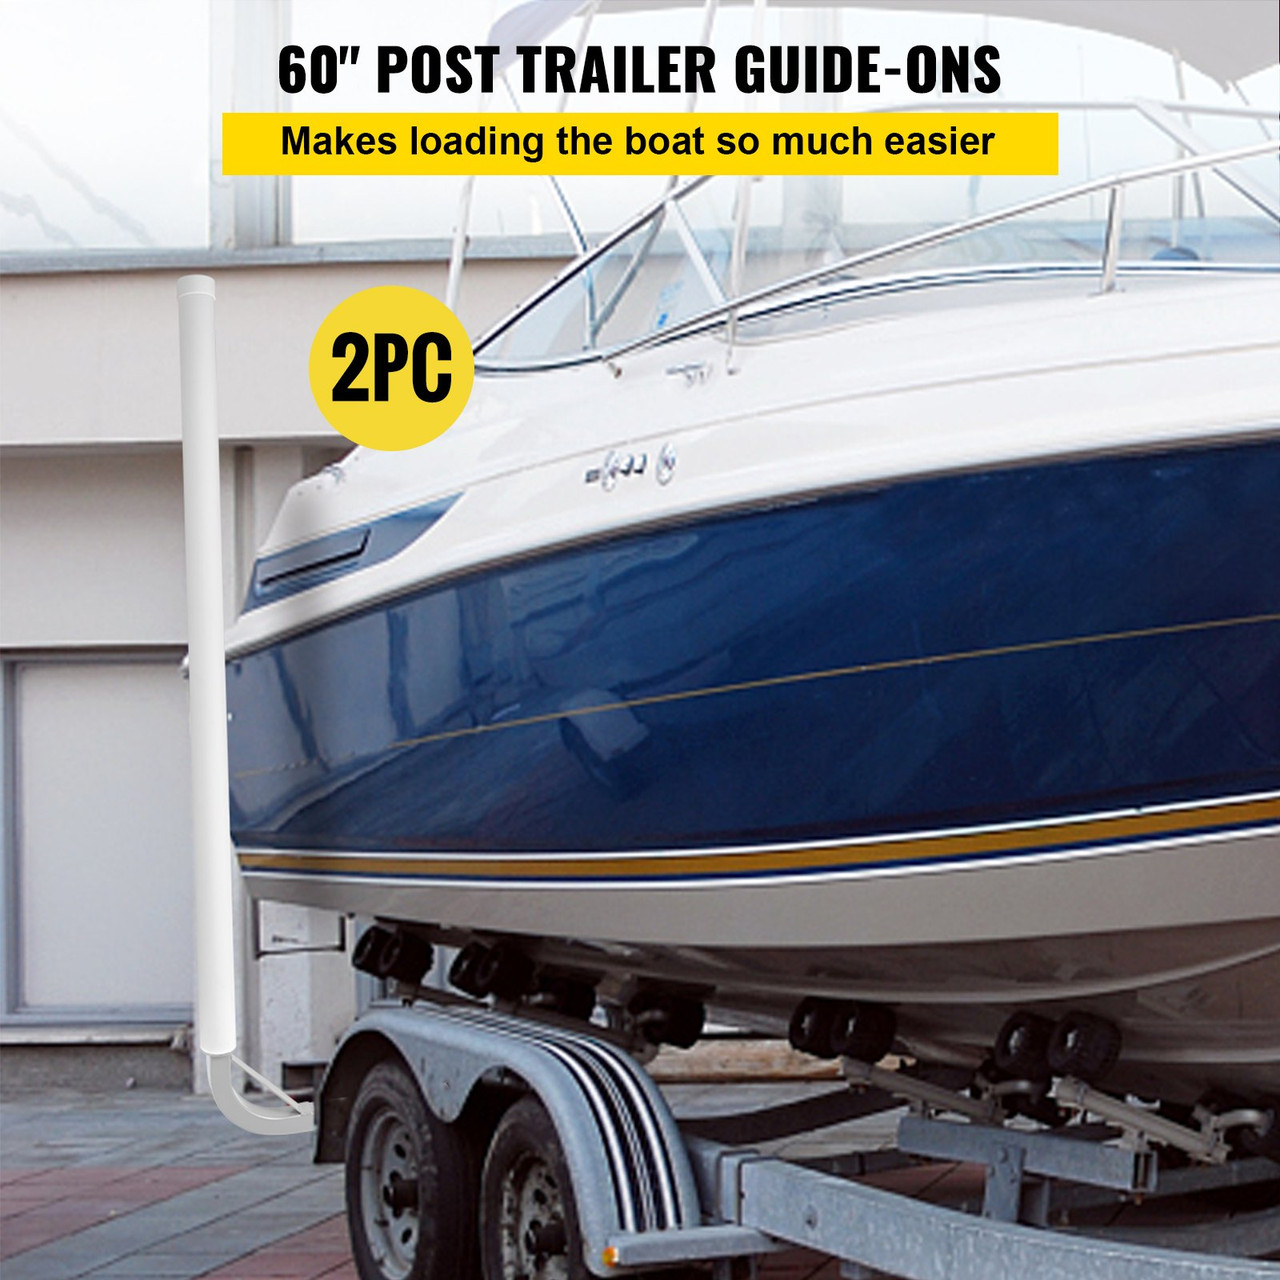 Boat Trailer Guide-on, 60", 2PCS Steel Trailer Post Guide ons, w/White PVC Tube Covers, Complete Mounting Accessories Included, for Ski Boat, Fishing Boat or Sailboat Trailer